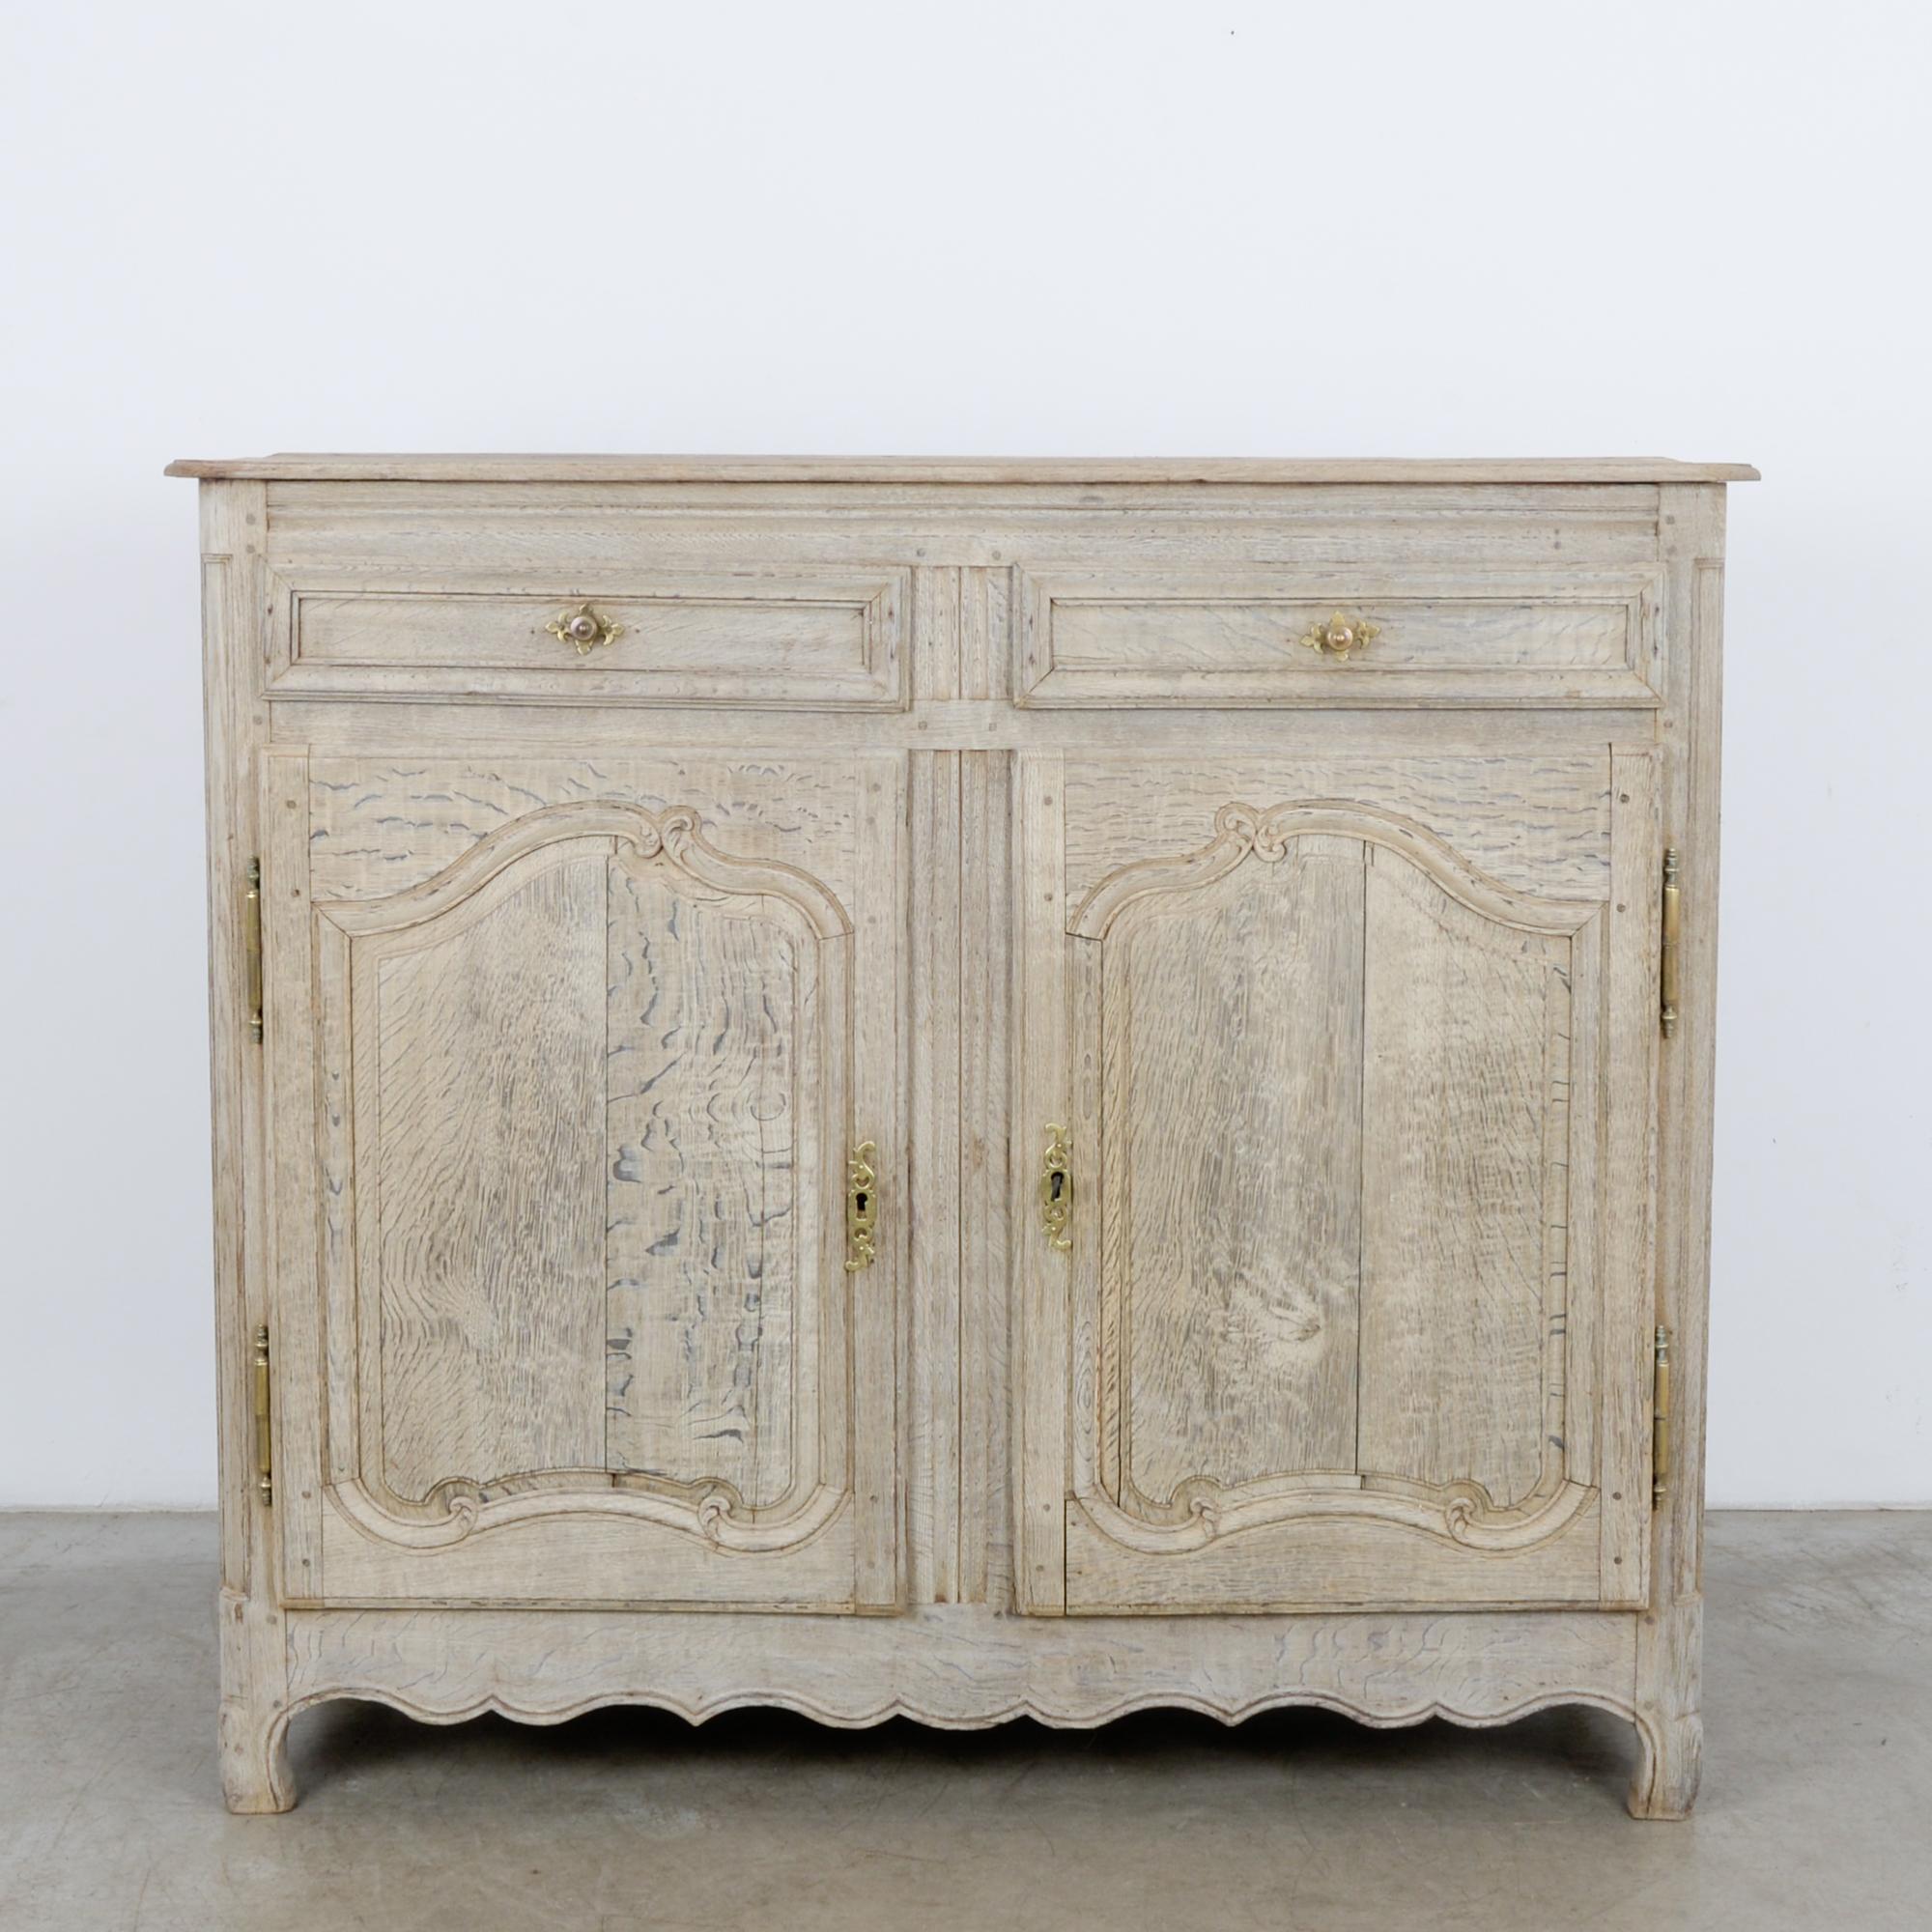 This bleached oak buffet was made in France, circa 1860. The scalloped apron and elegant curves of the paneling display the outstanding craftsmanship behind this piece. The buffet houses two drawers, and the set of double doors below open to reveal